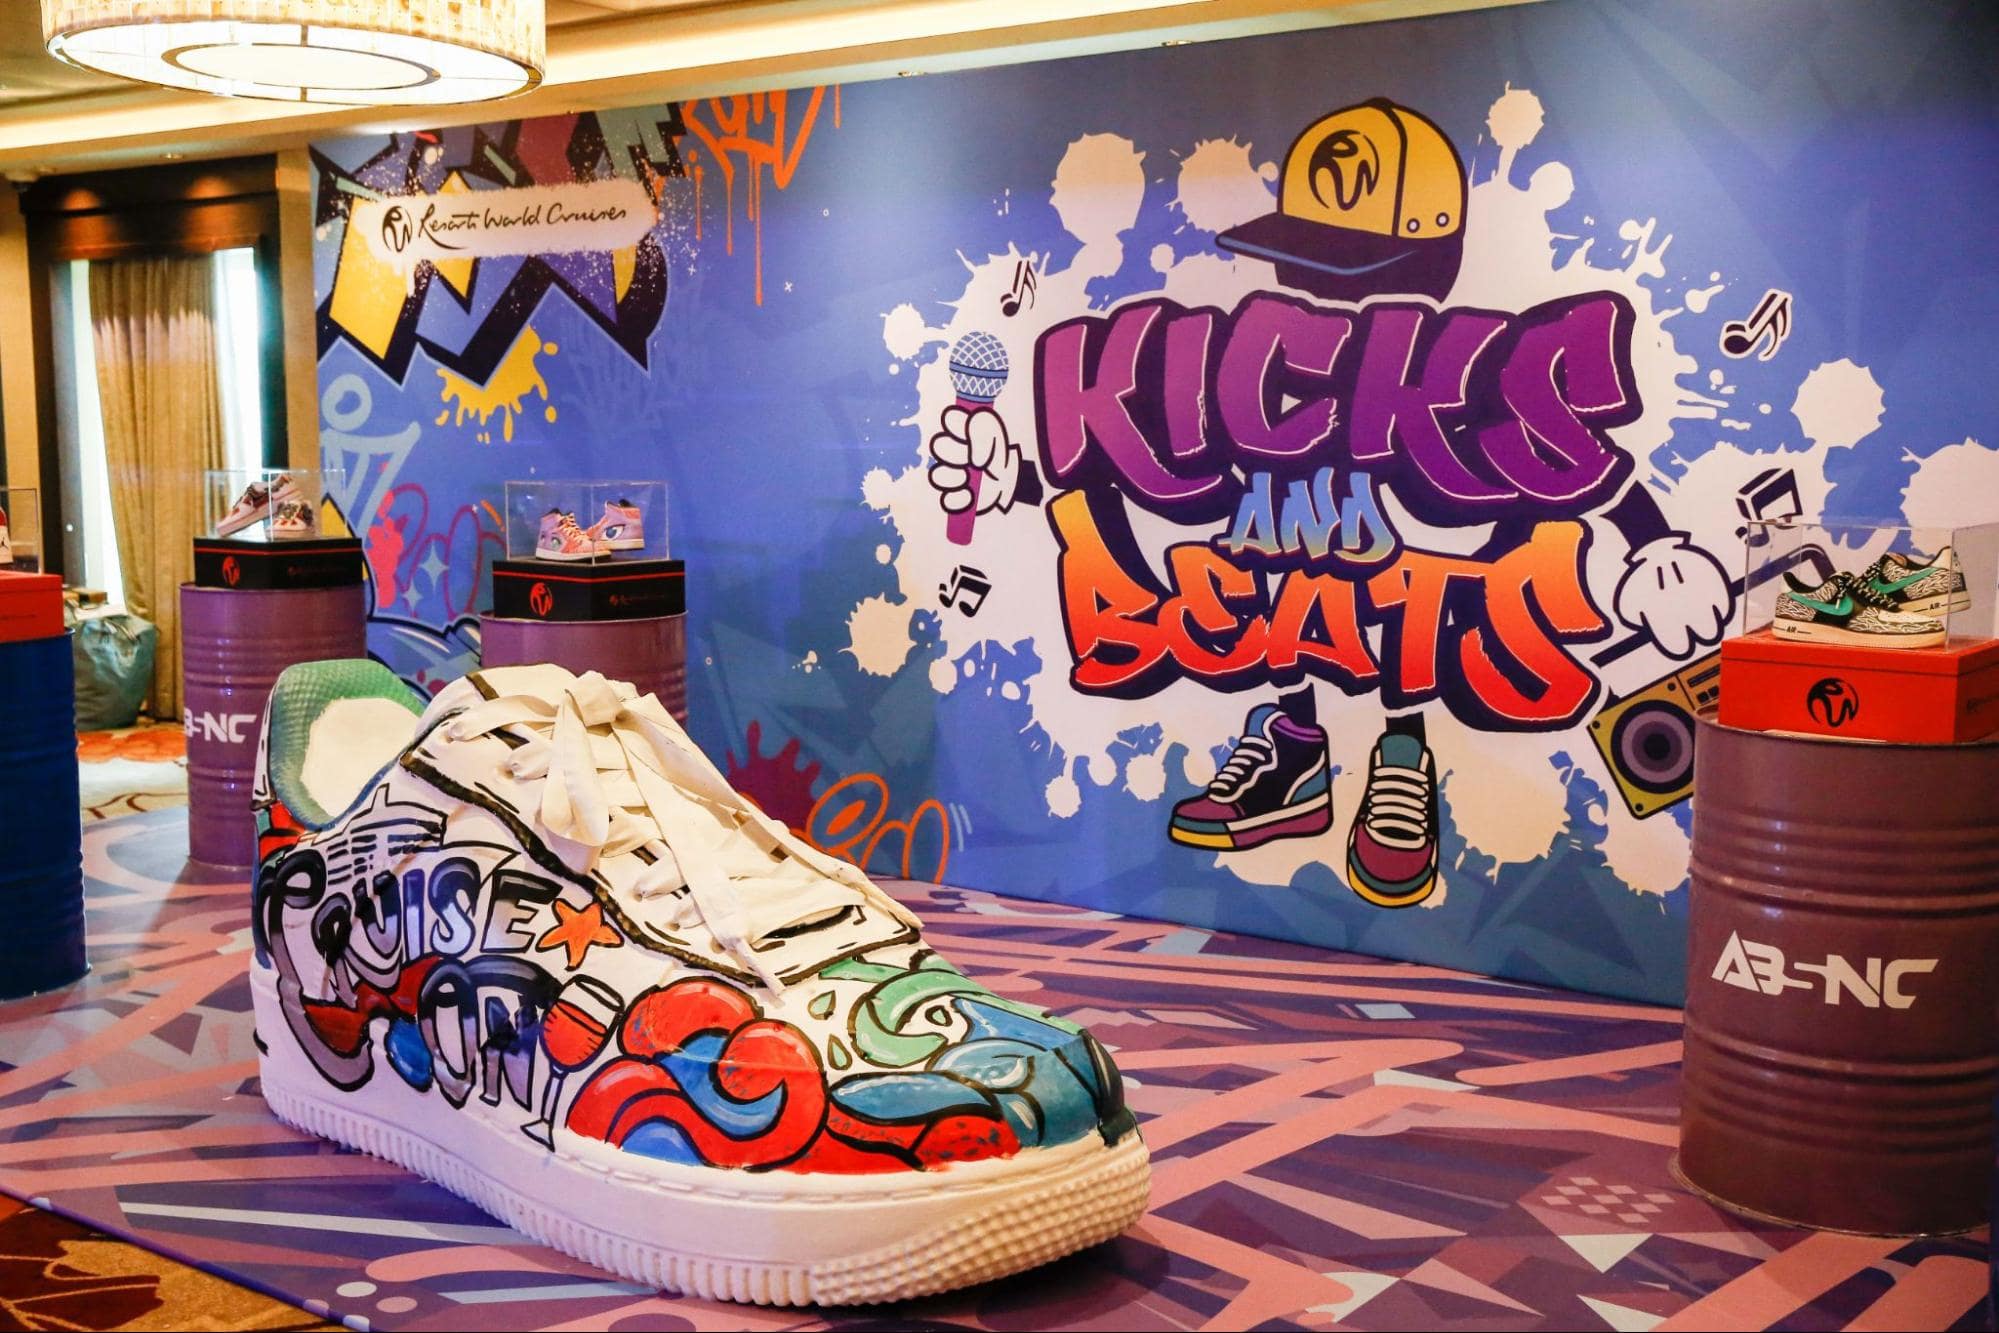 Giant Sneaker After Painting - Resorts World Cruises Kicks And Beats